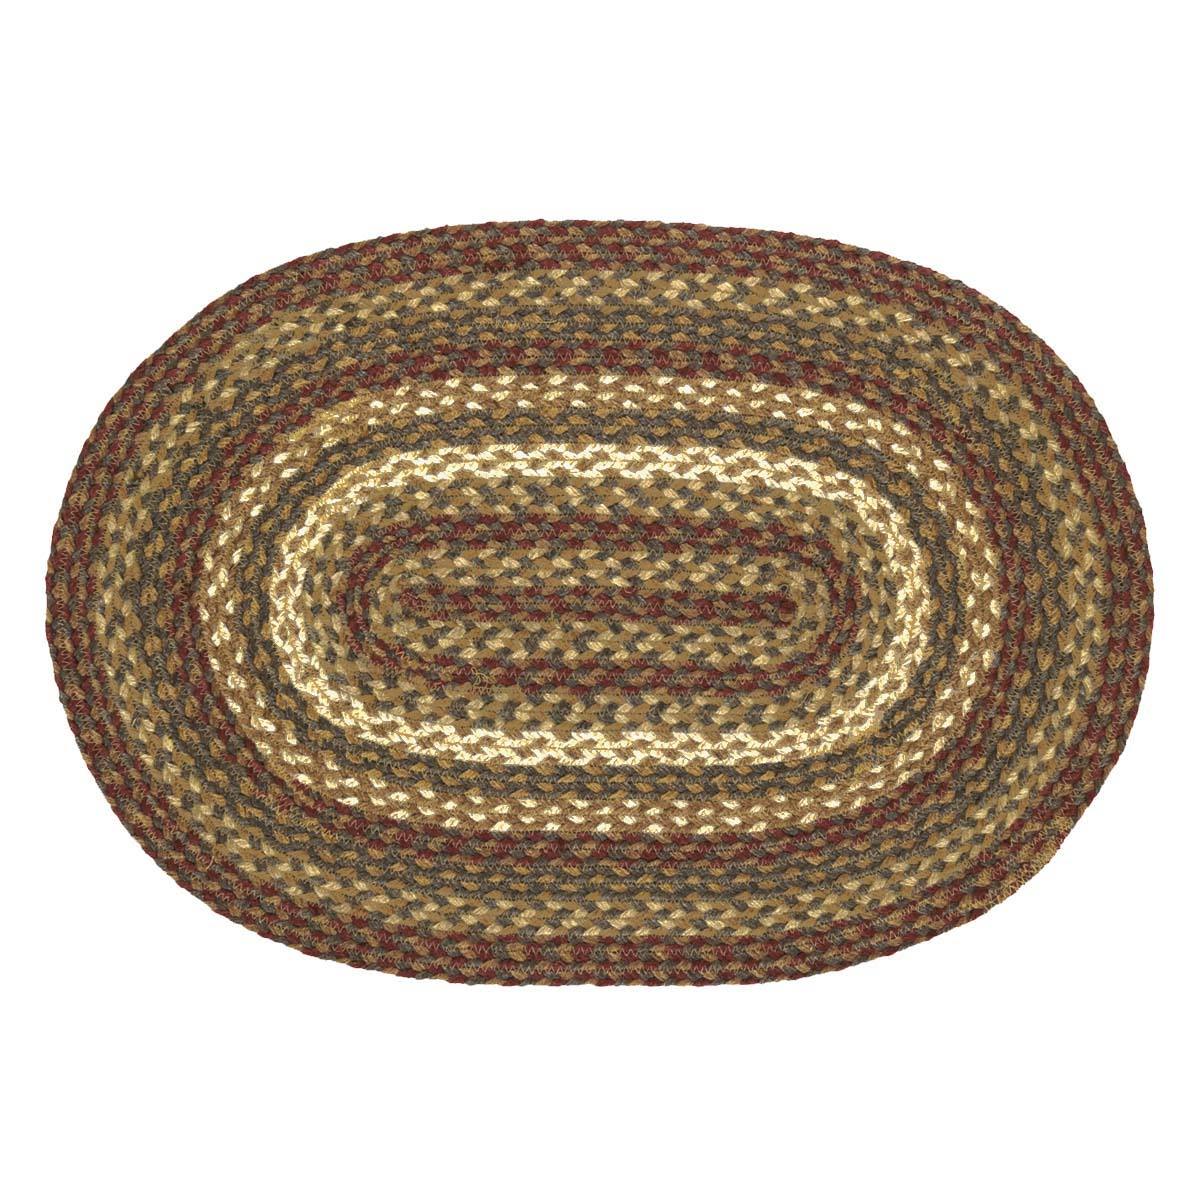 Tea Cabin Jute Braided Rug Oval 24"x36" with Rug Pad VHC Brands - The Fox Decor